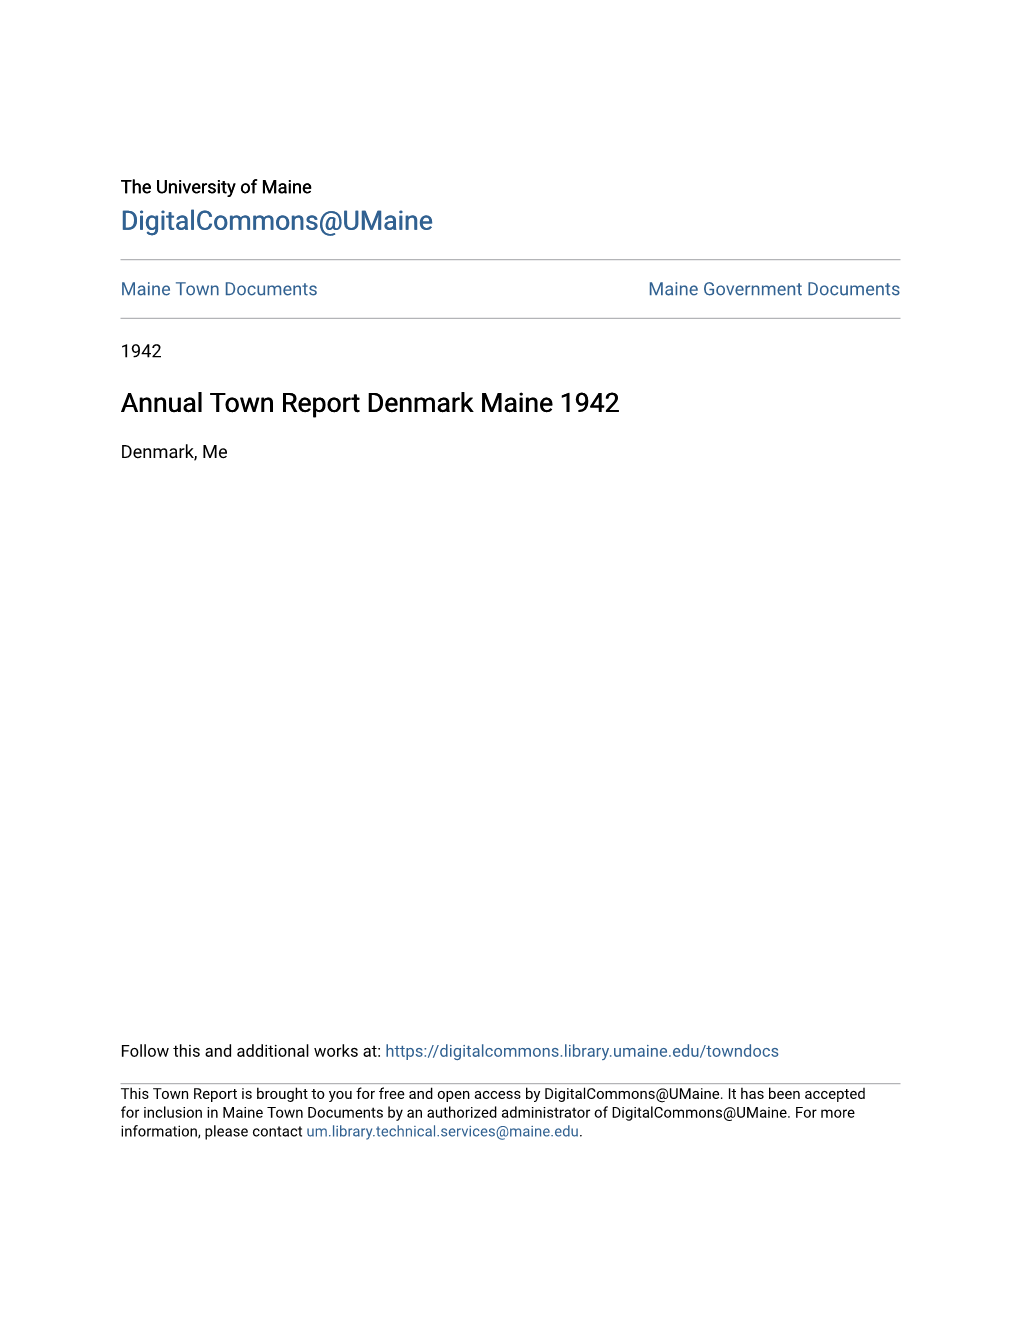 Annual Town Report Denmark Maine 1942